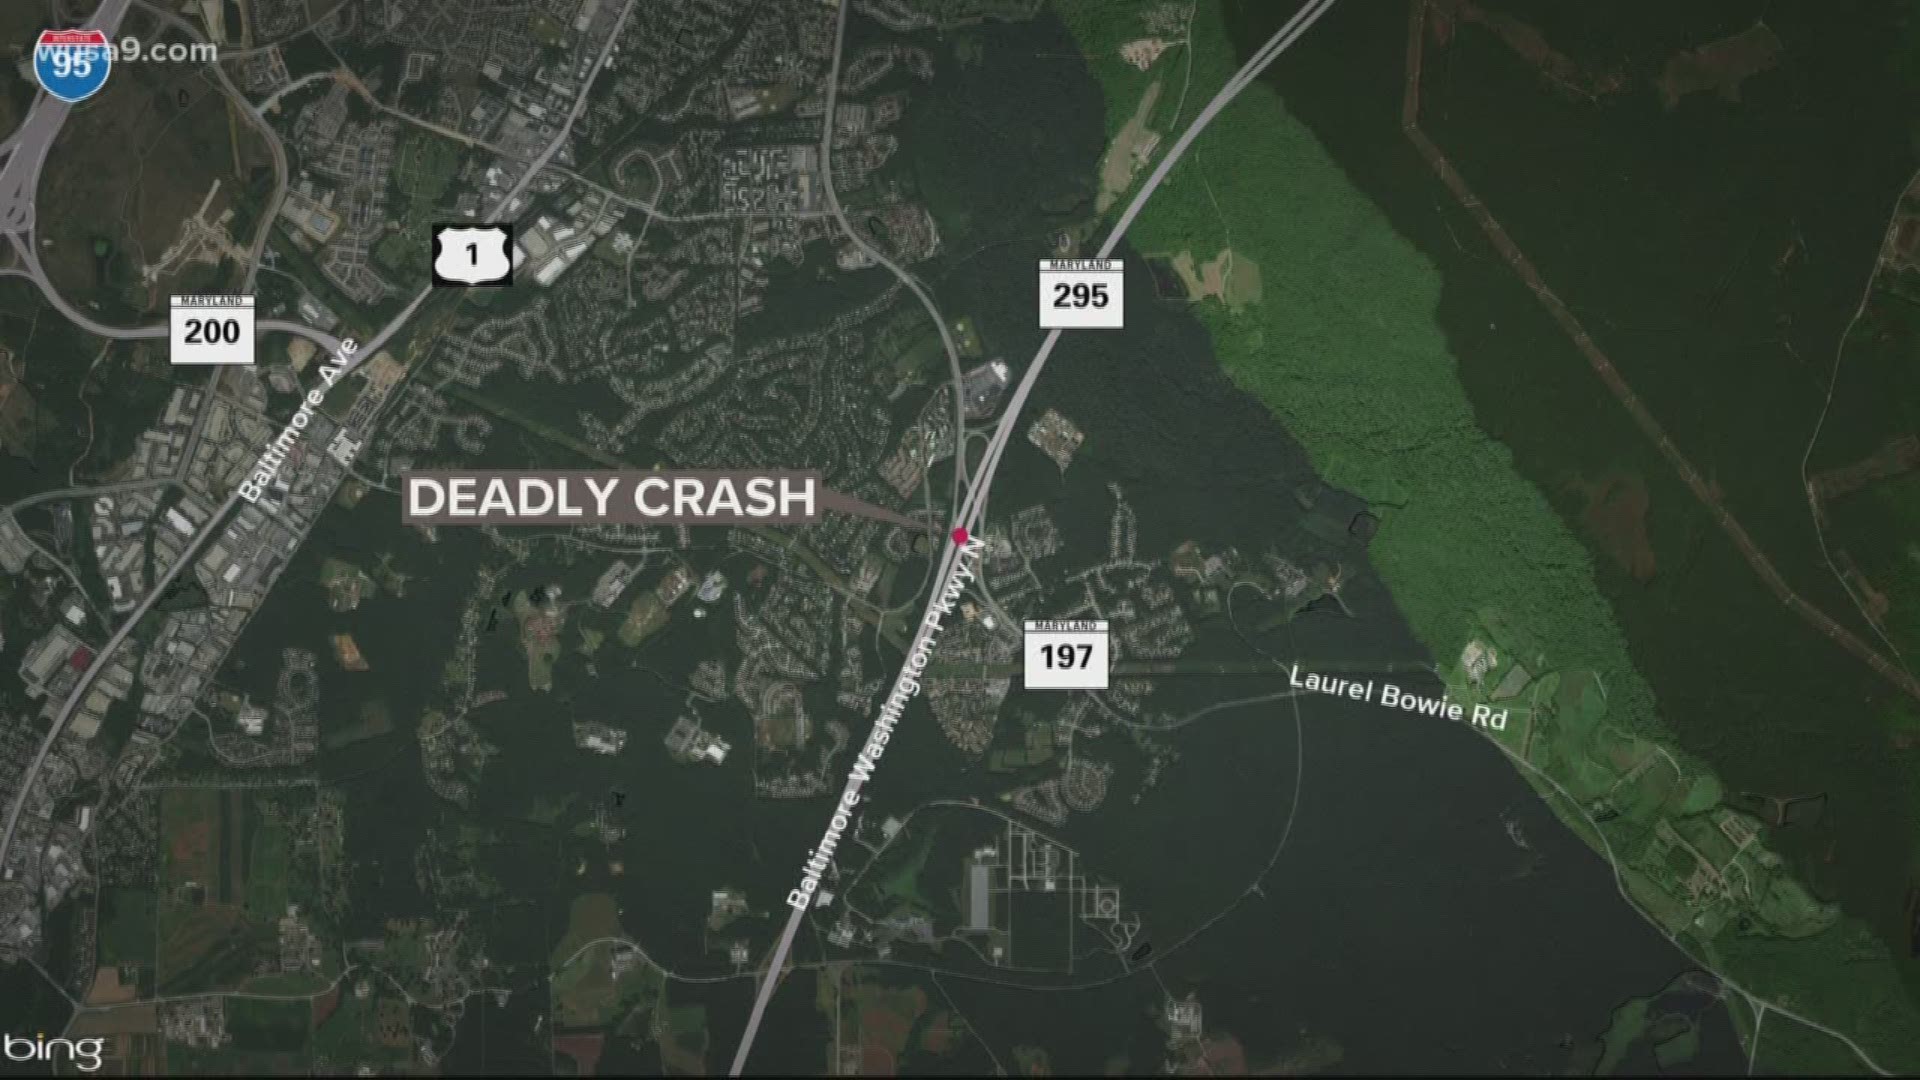 A single-car crash on the Baltimore-Washington Parkway in Laurel, Md., has left a woman dead and a man in serious condition.